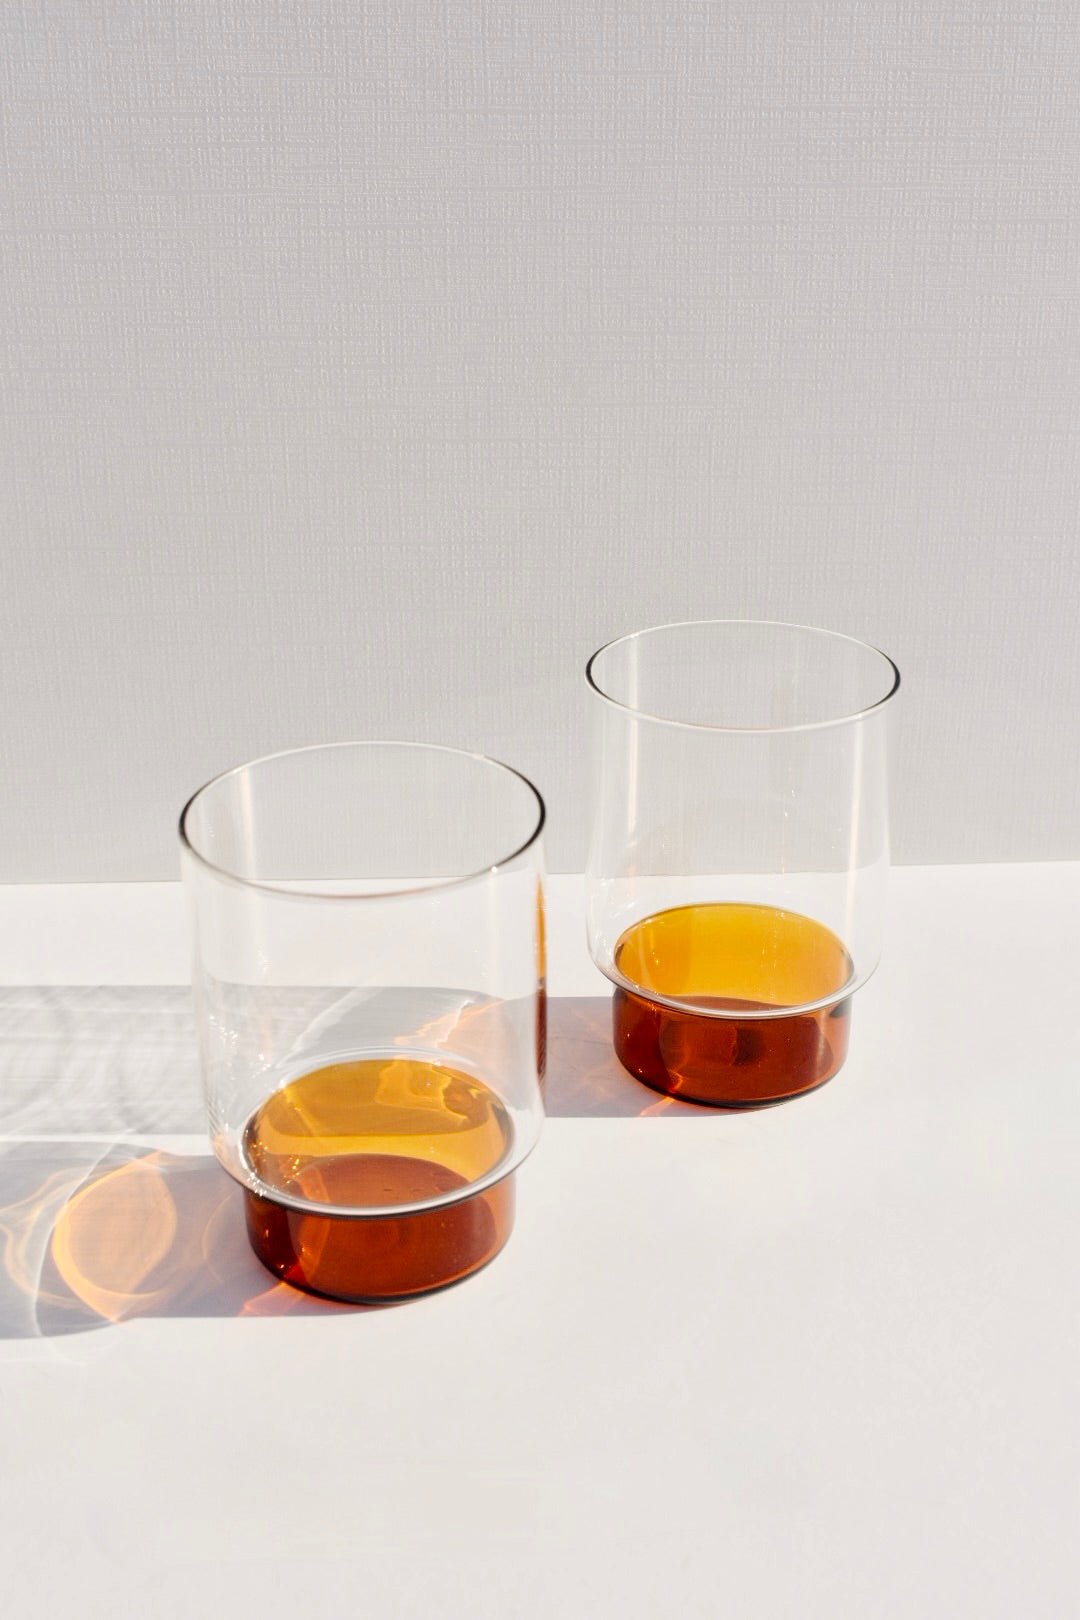 Rye Amber Base Glasses (set of two) - Ardent Market - Aaron Probyn